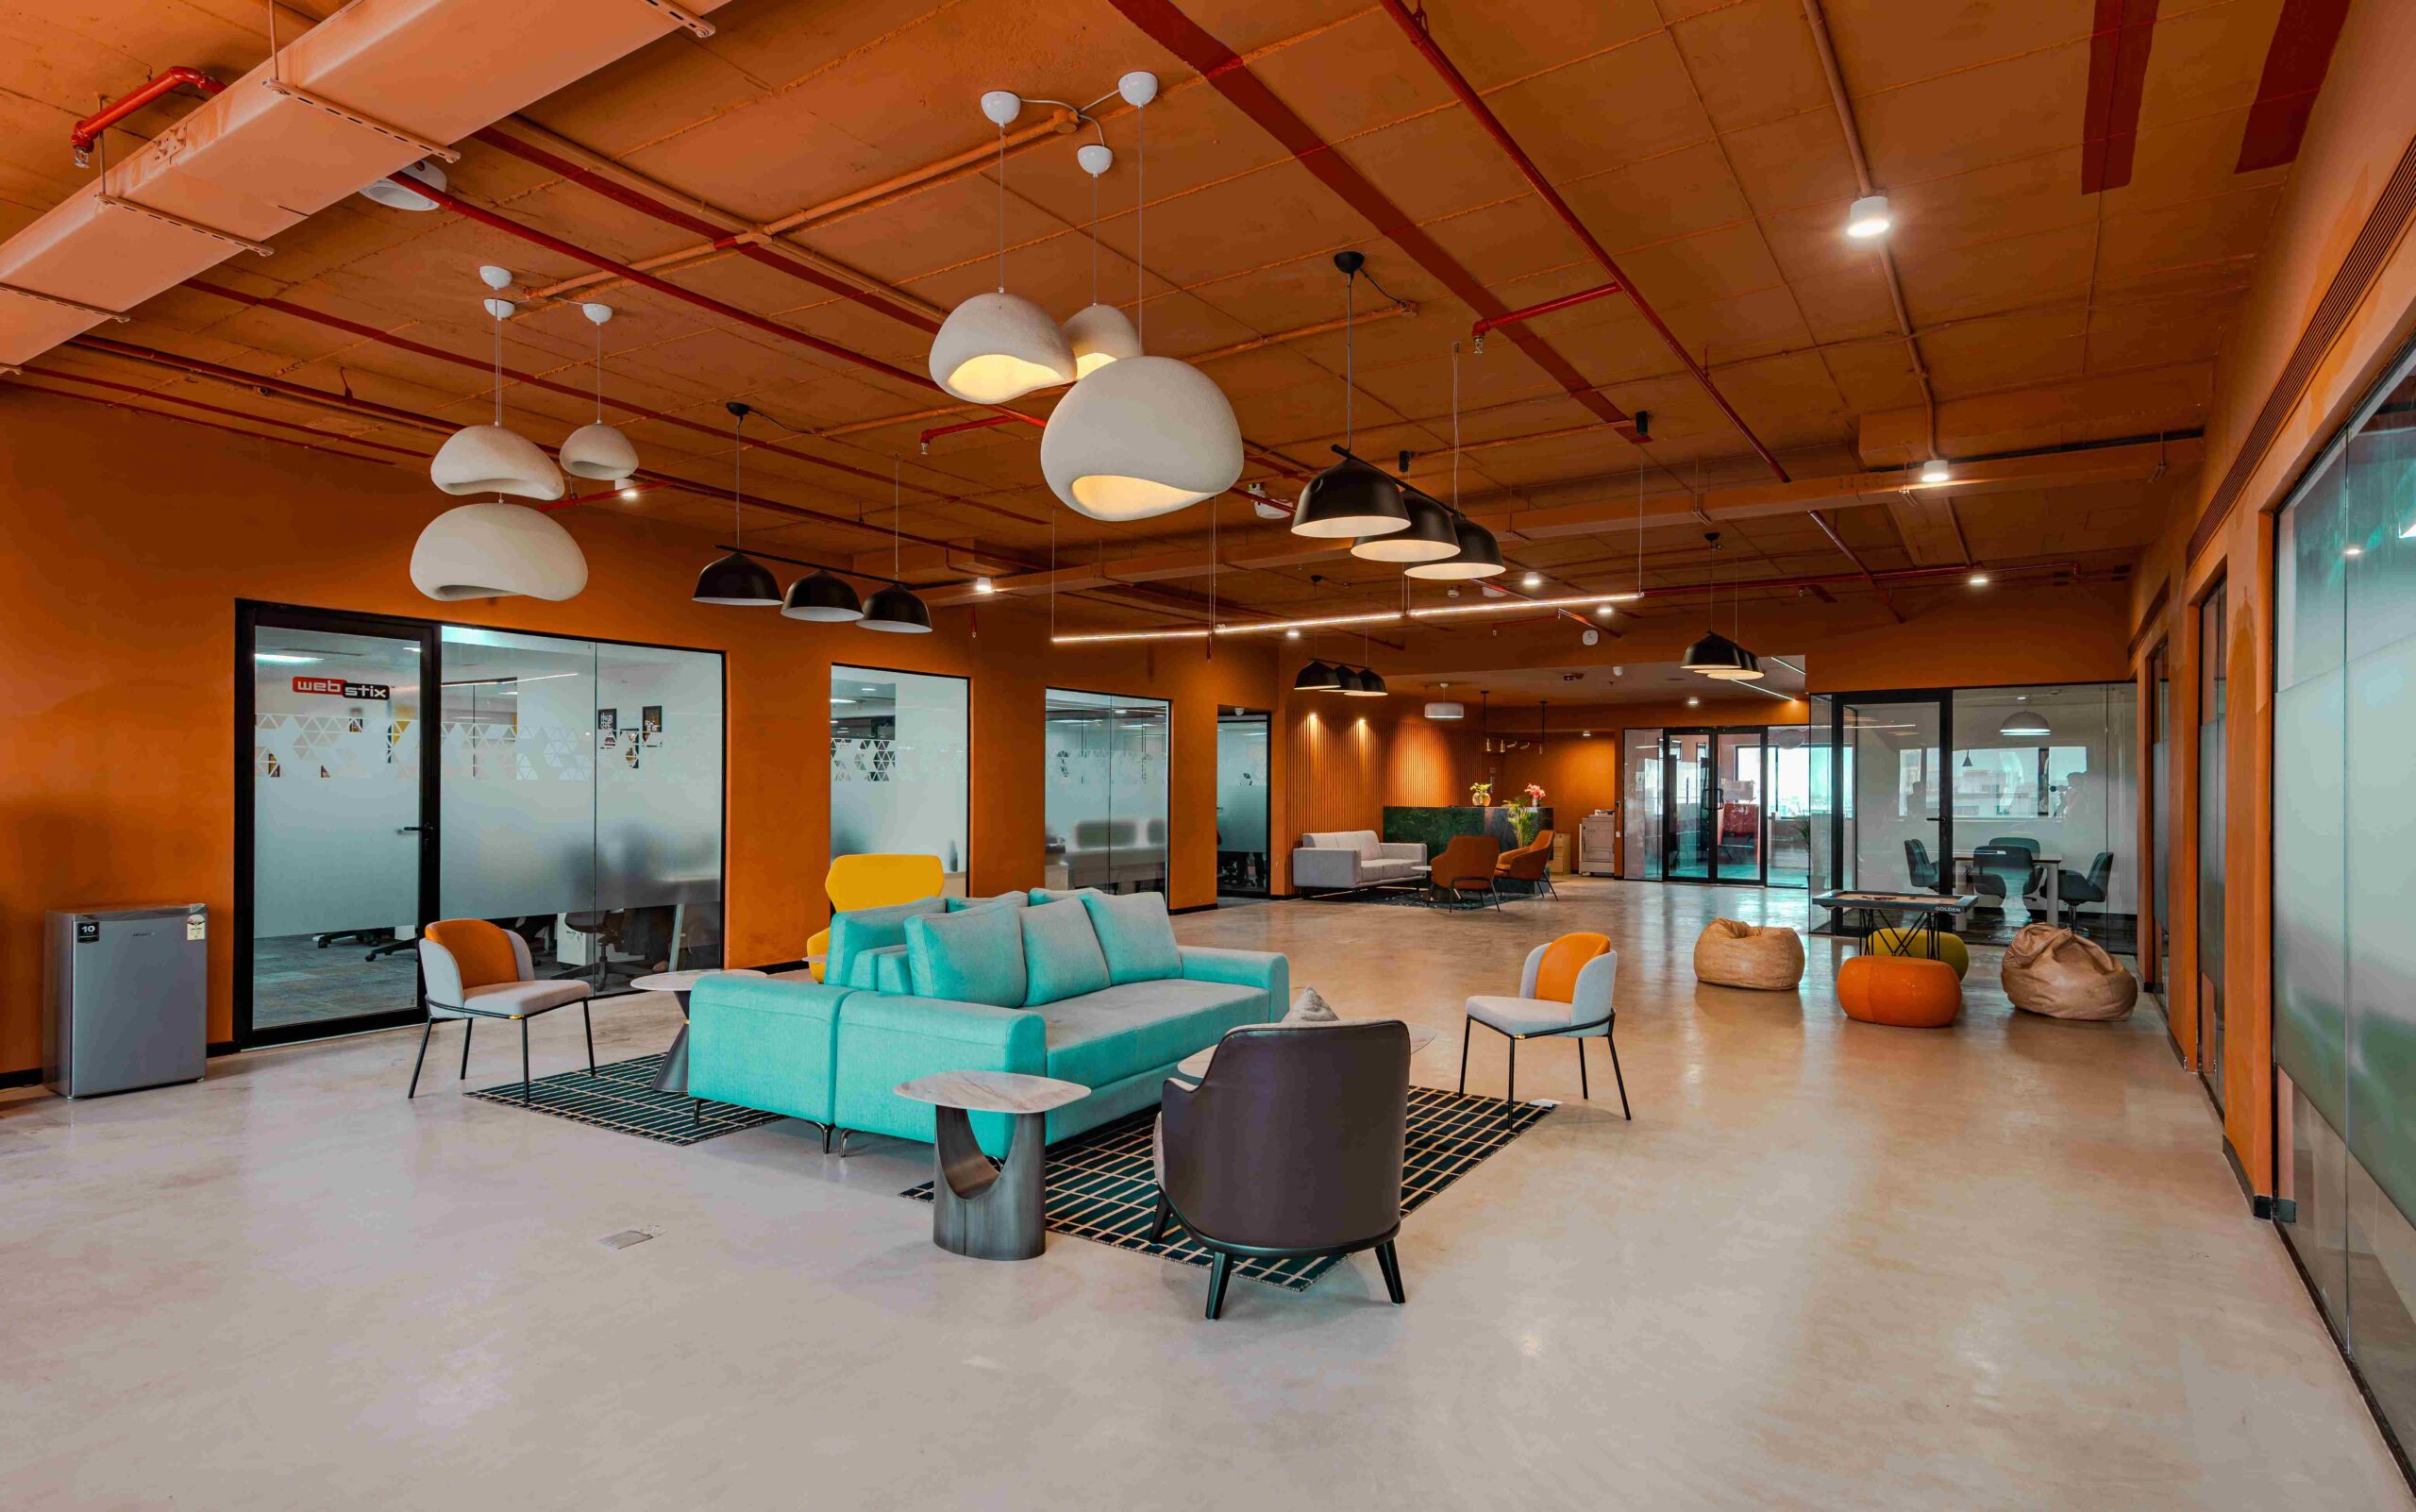 Cove offices’ coworking spaces in OMR, Chennai